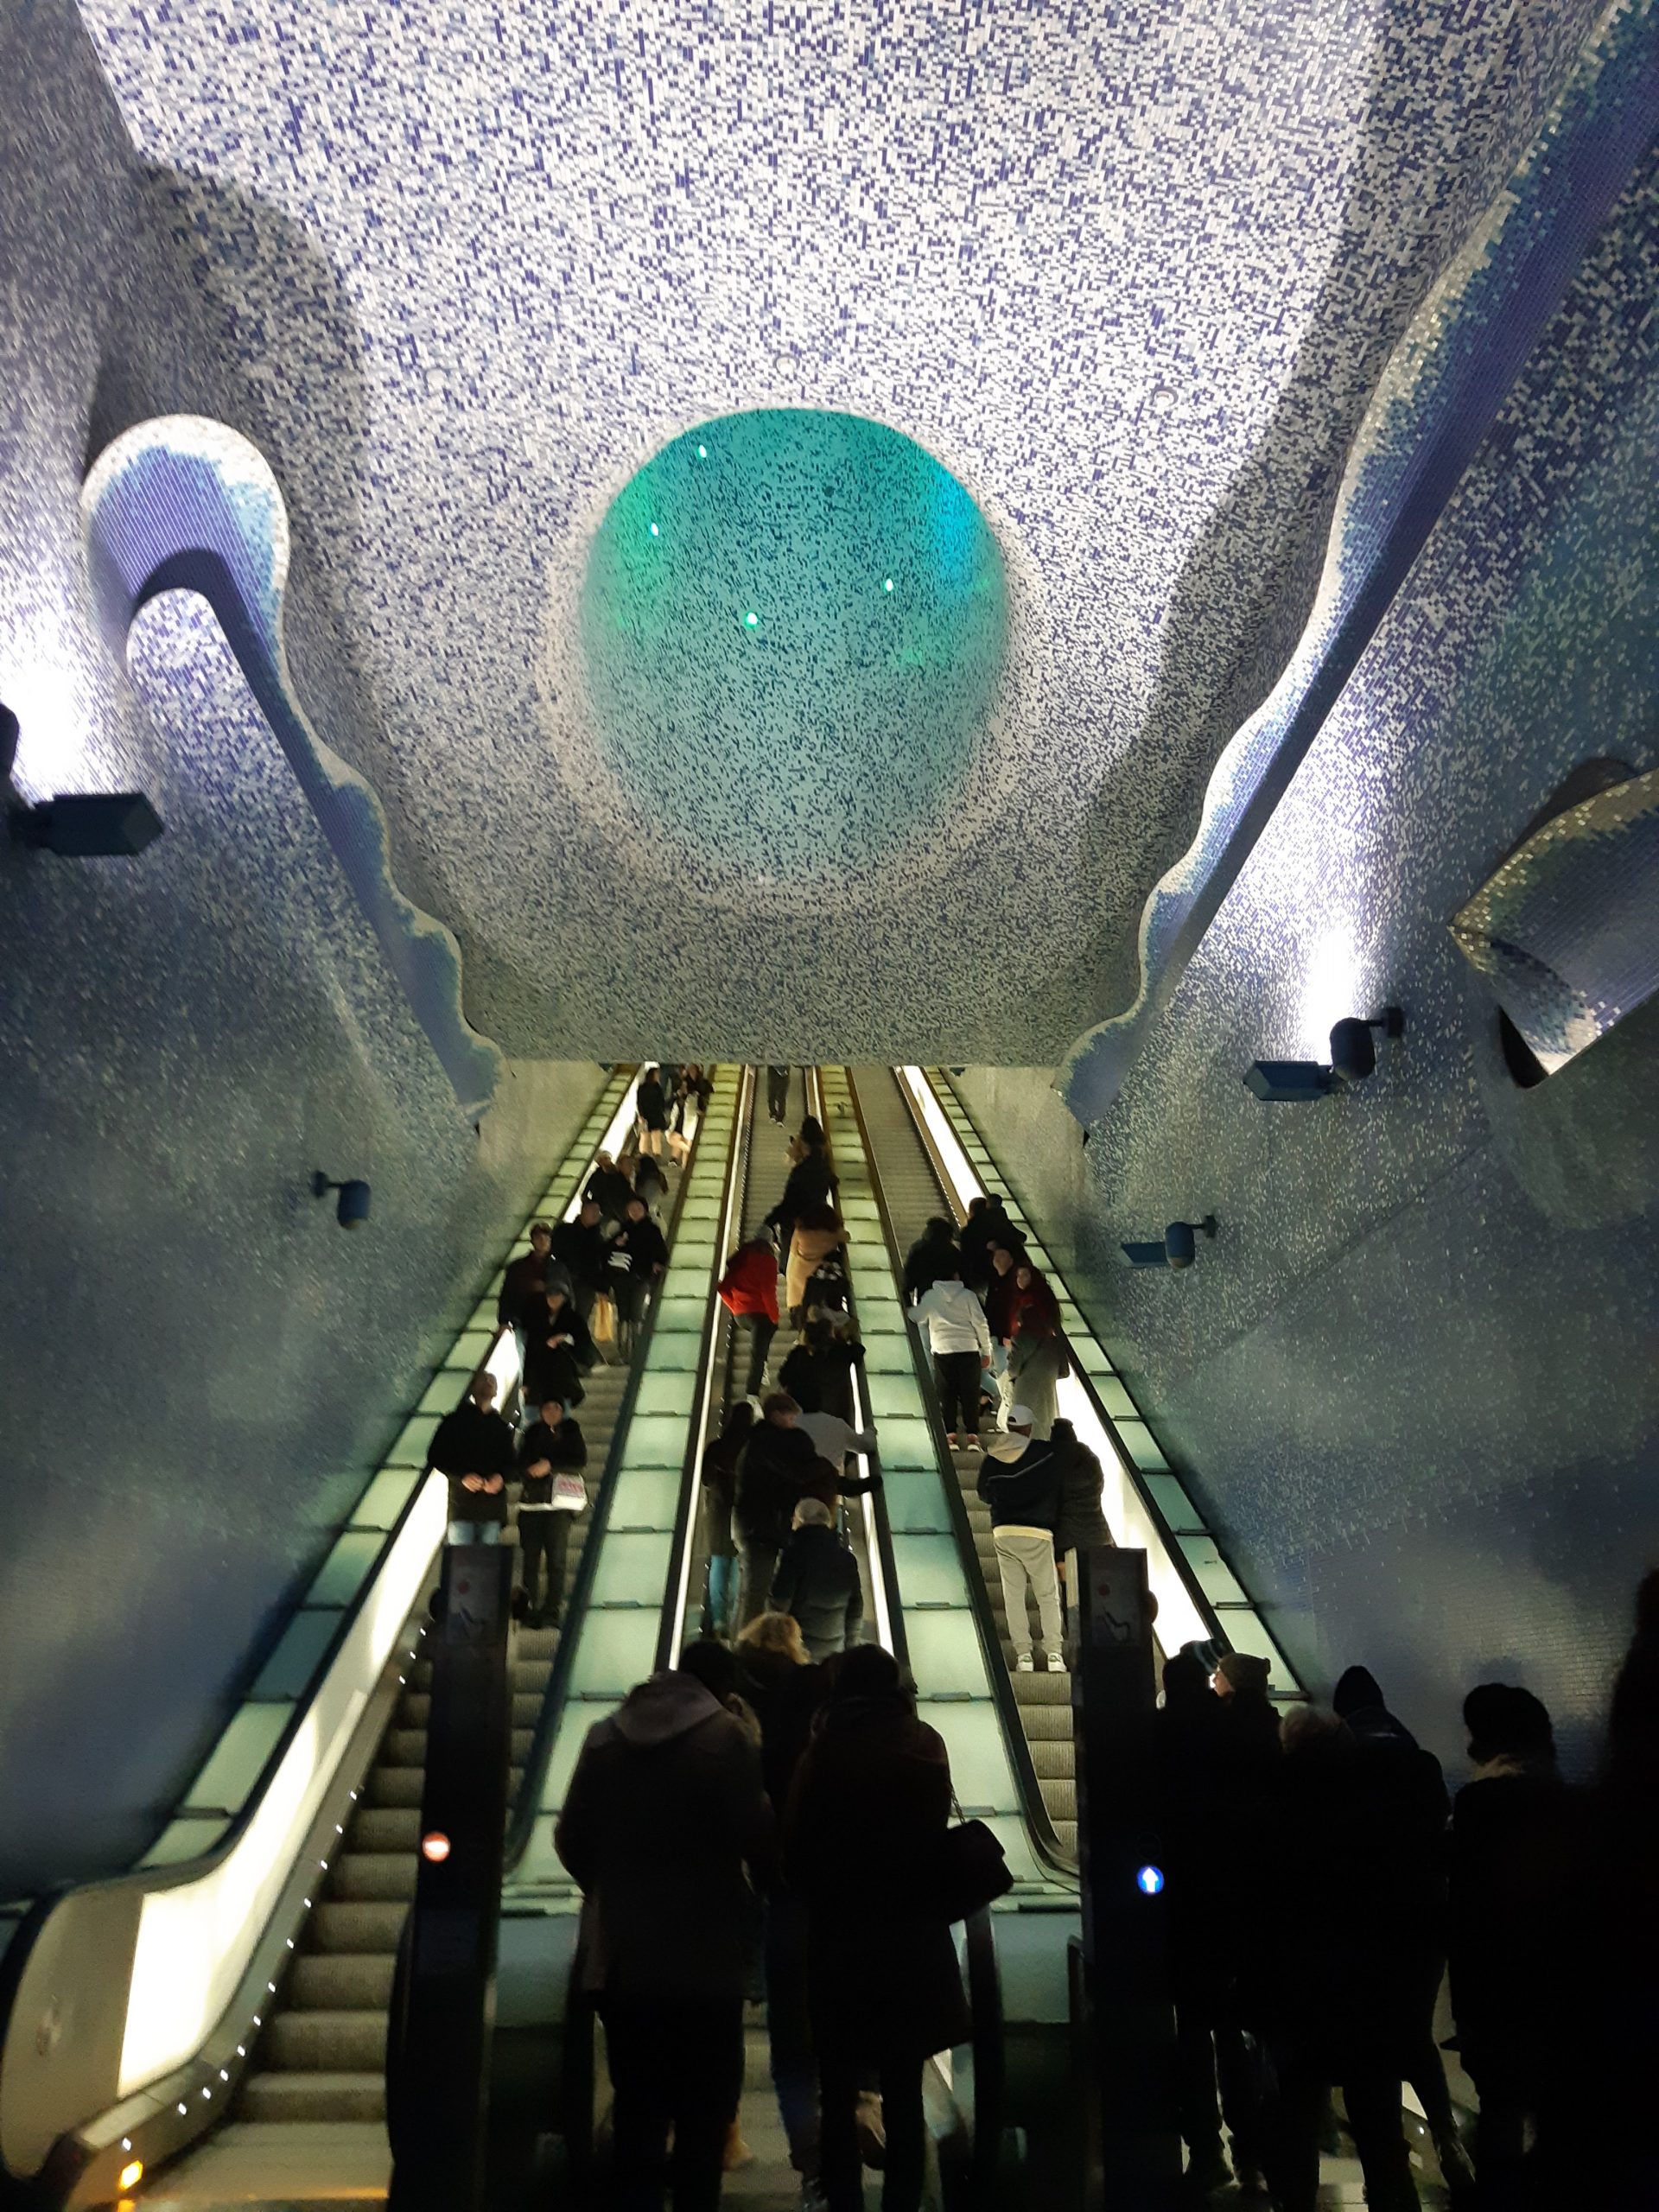 Naples Italy. Most beautiful metro station in the world